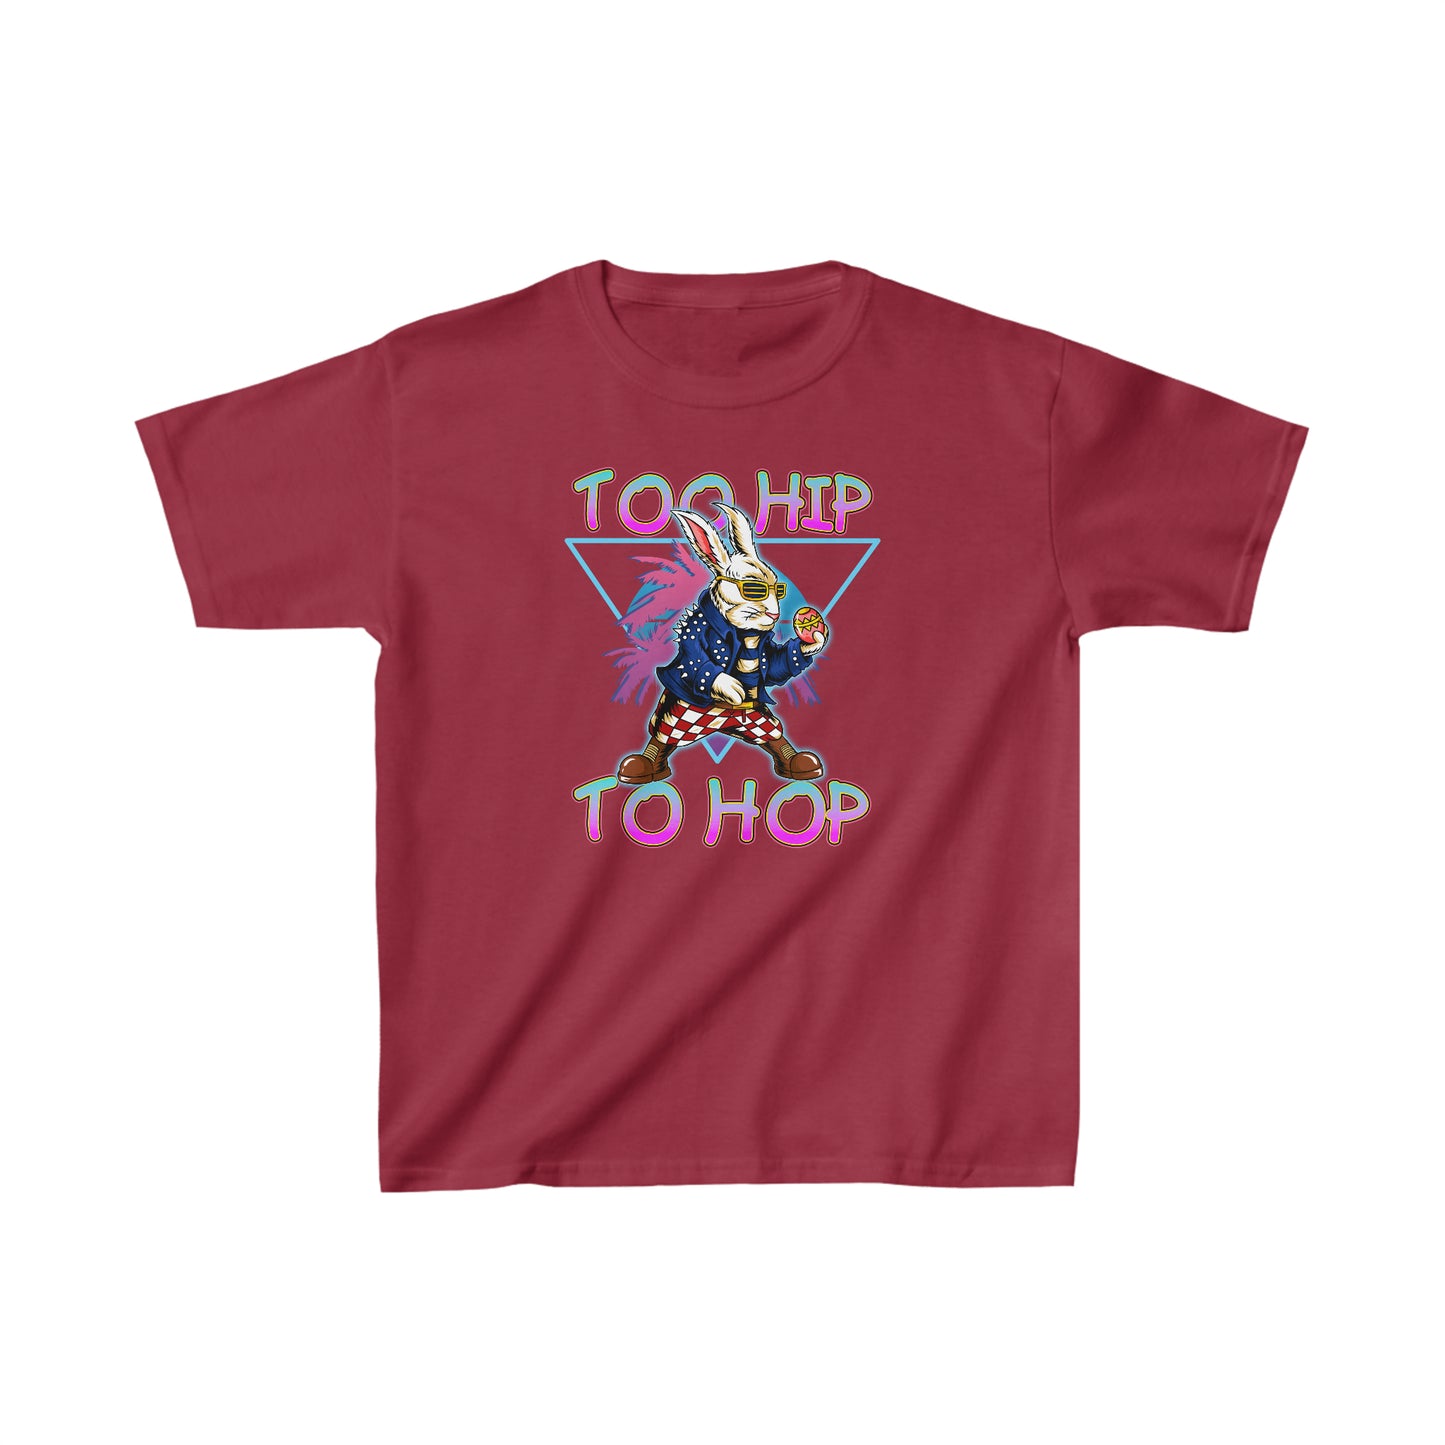 Too hip Too hop Shirt for Kids Heavy Cotton™ Tee Cardinal Red